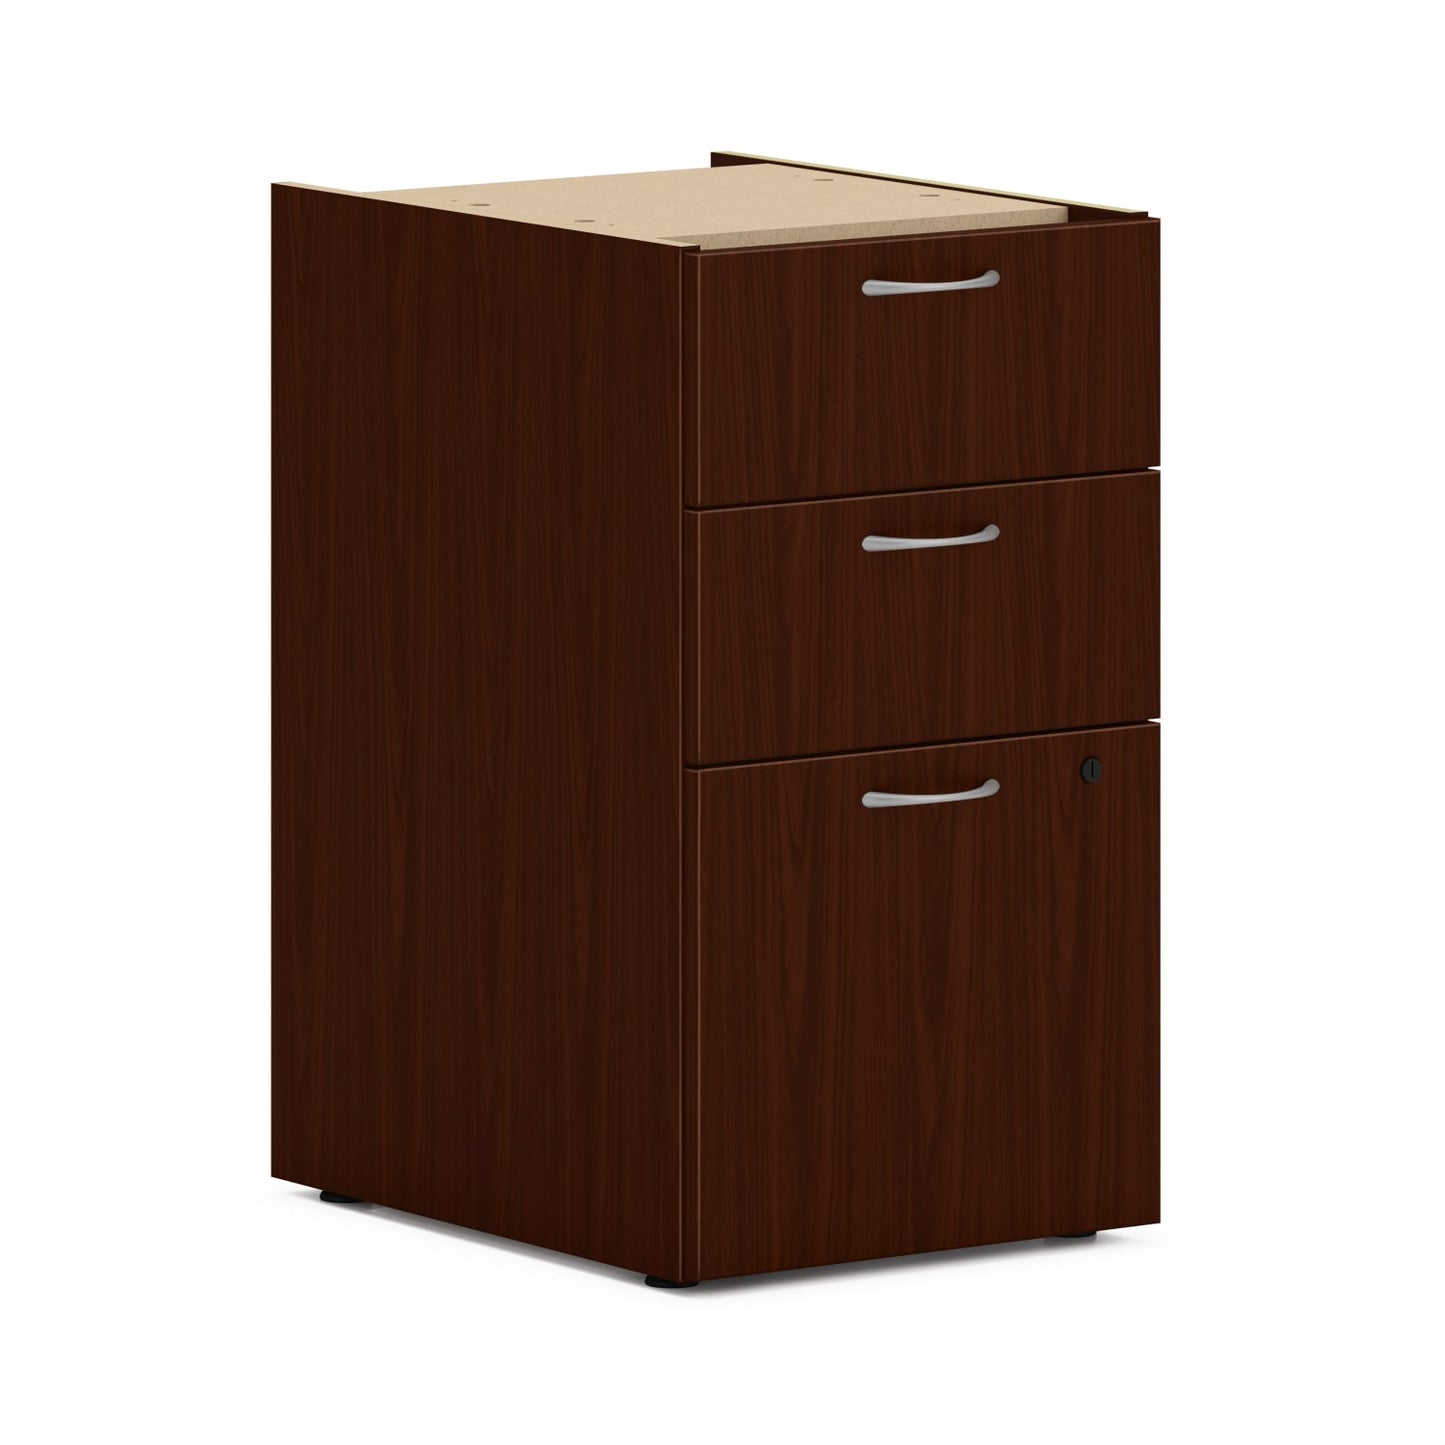 HON Mod Support Pedestal | 2 Box / 1 File Drawer | 15"W x 20"D x 28"H | Traditional Mahogany Finish